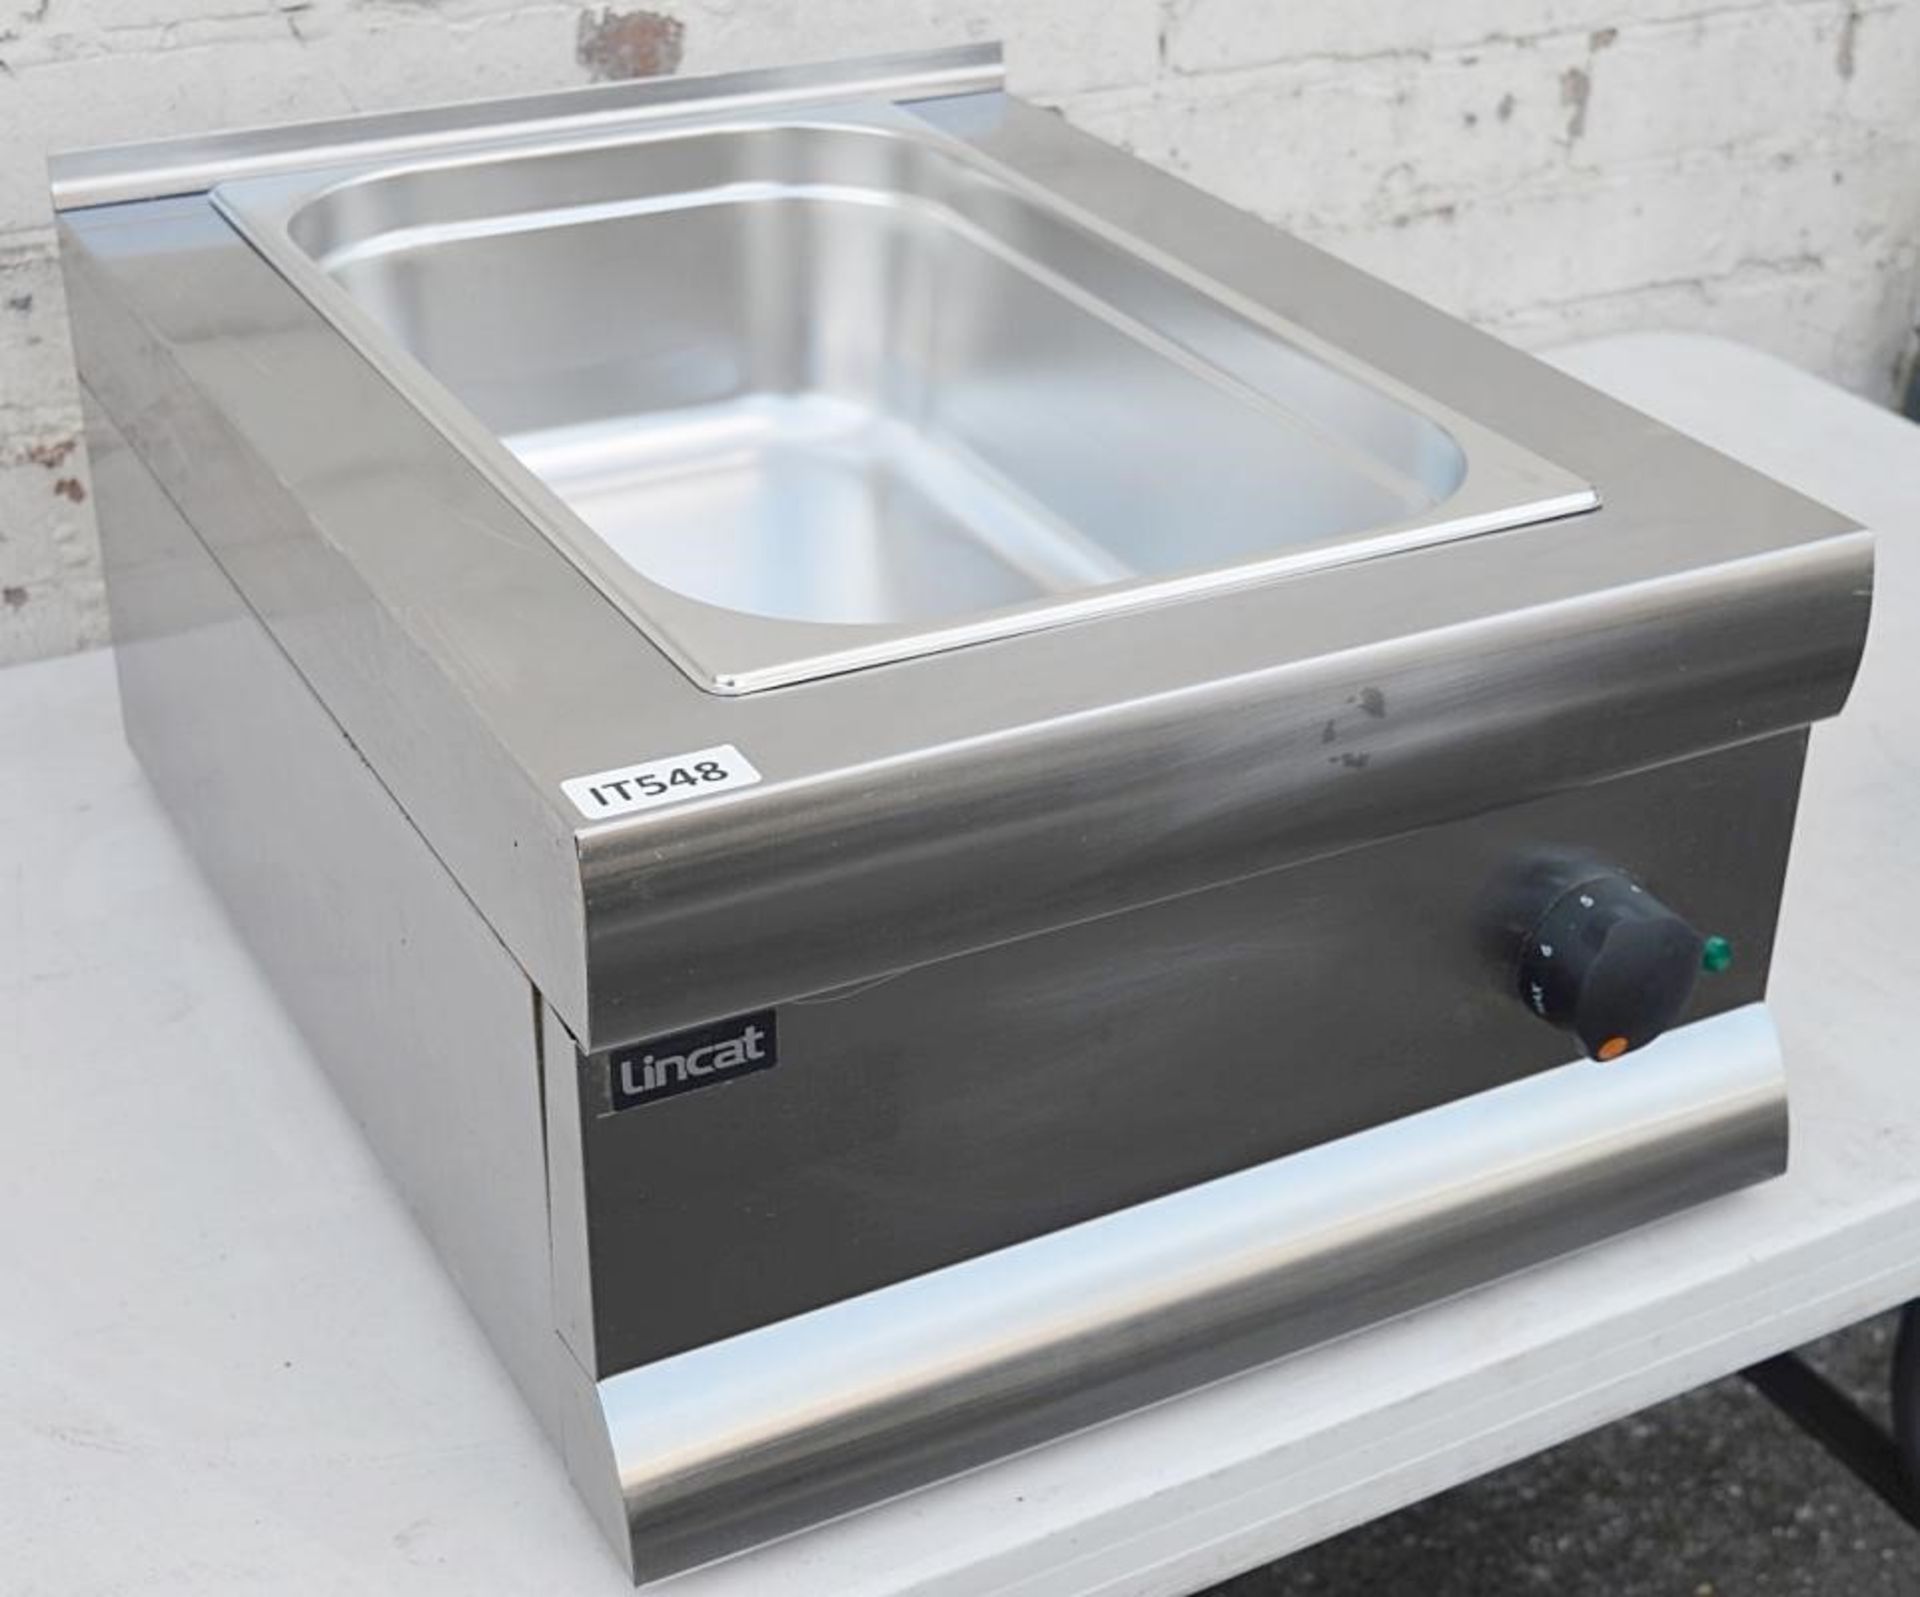 1 x LINCAT Commercial Bain Marie (BM4) - Made In UK - Stainless Steel Finish - Ref: IT548 - CL232 - - Image 5 of 9